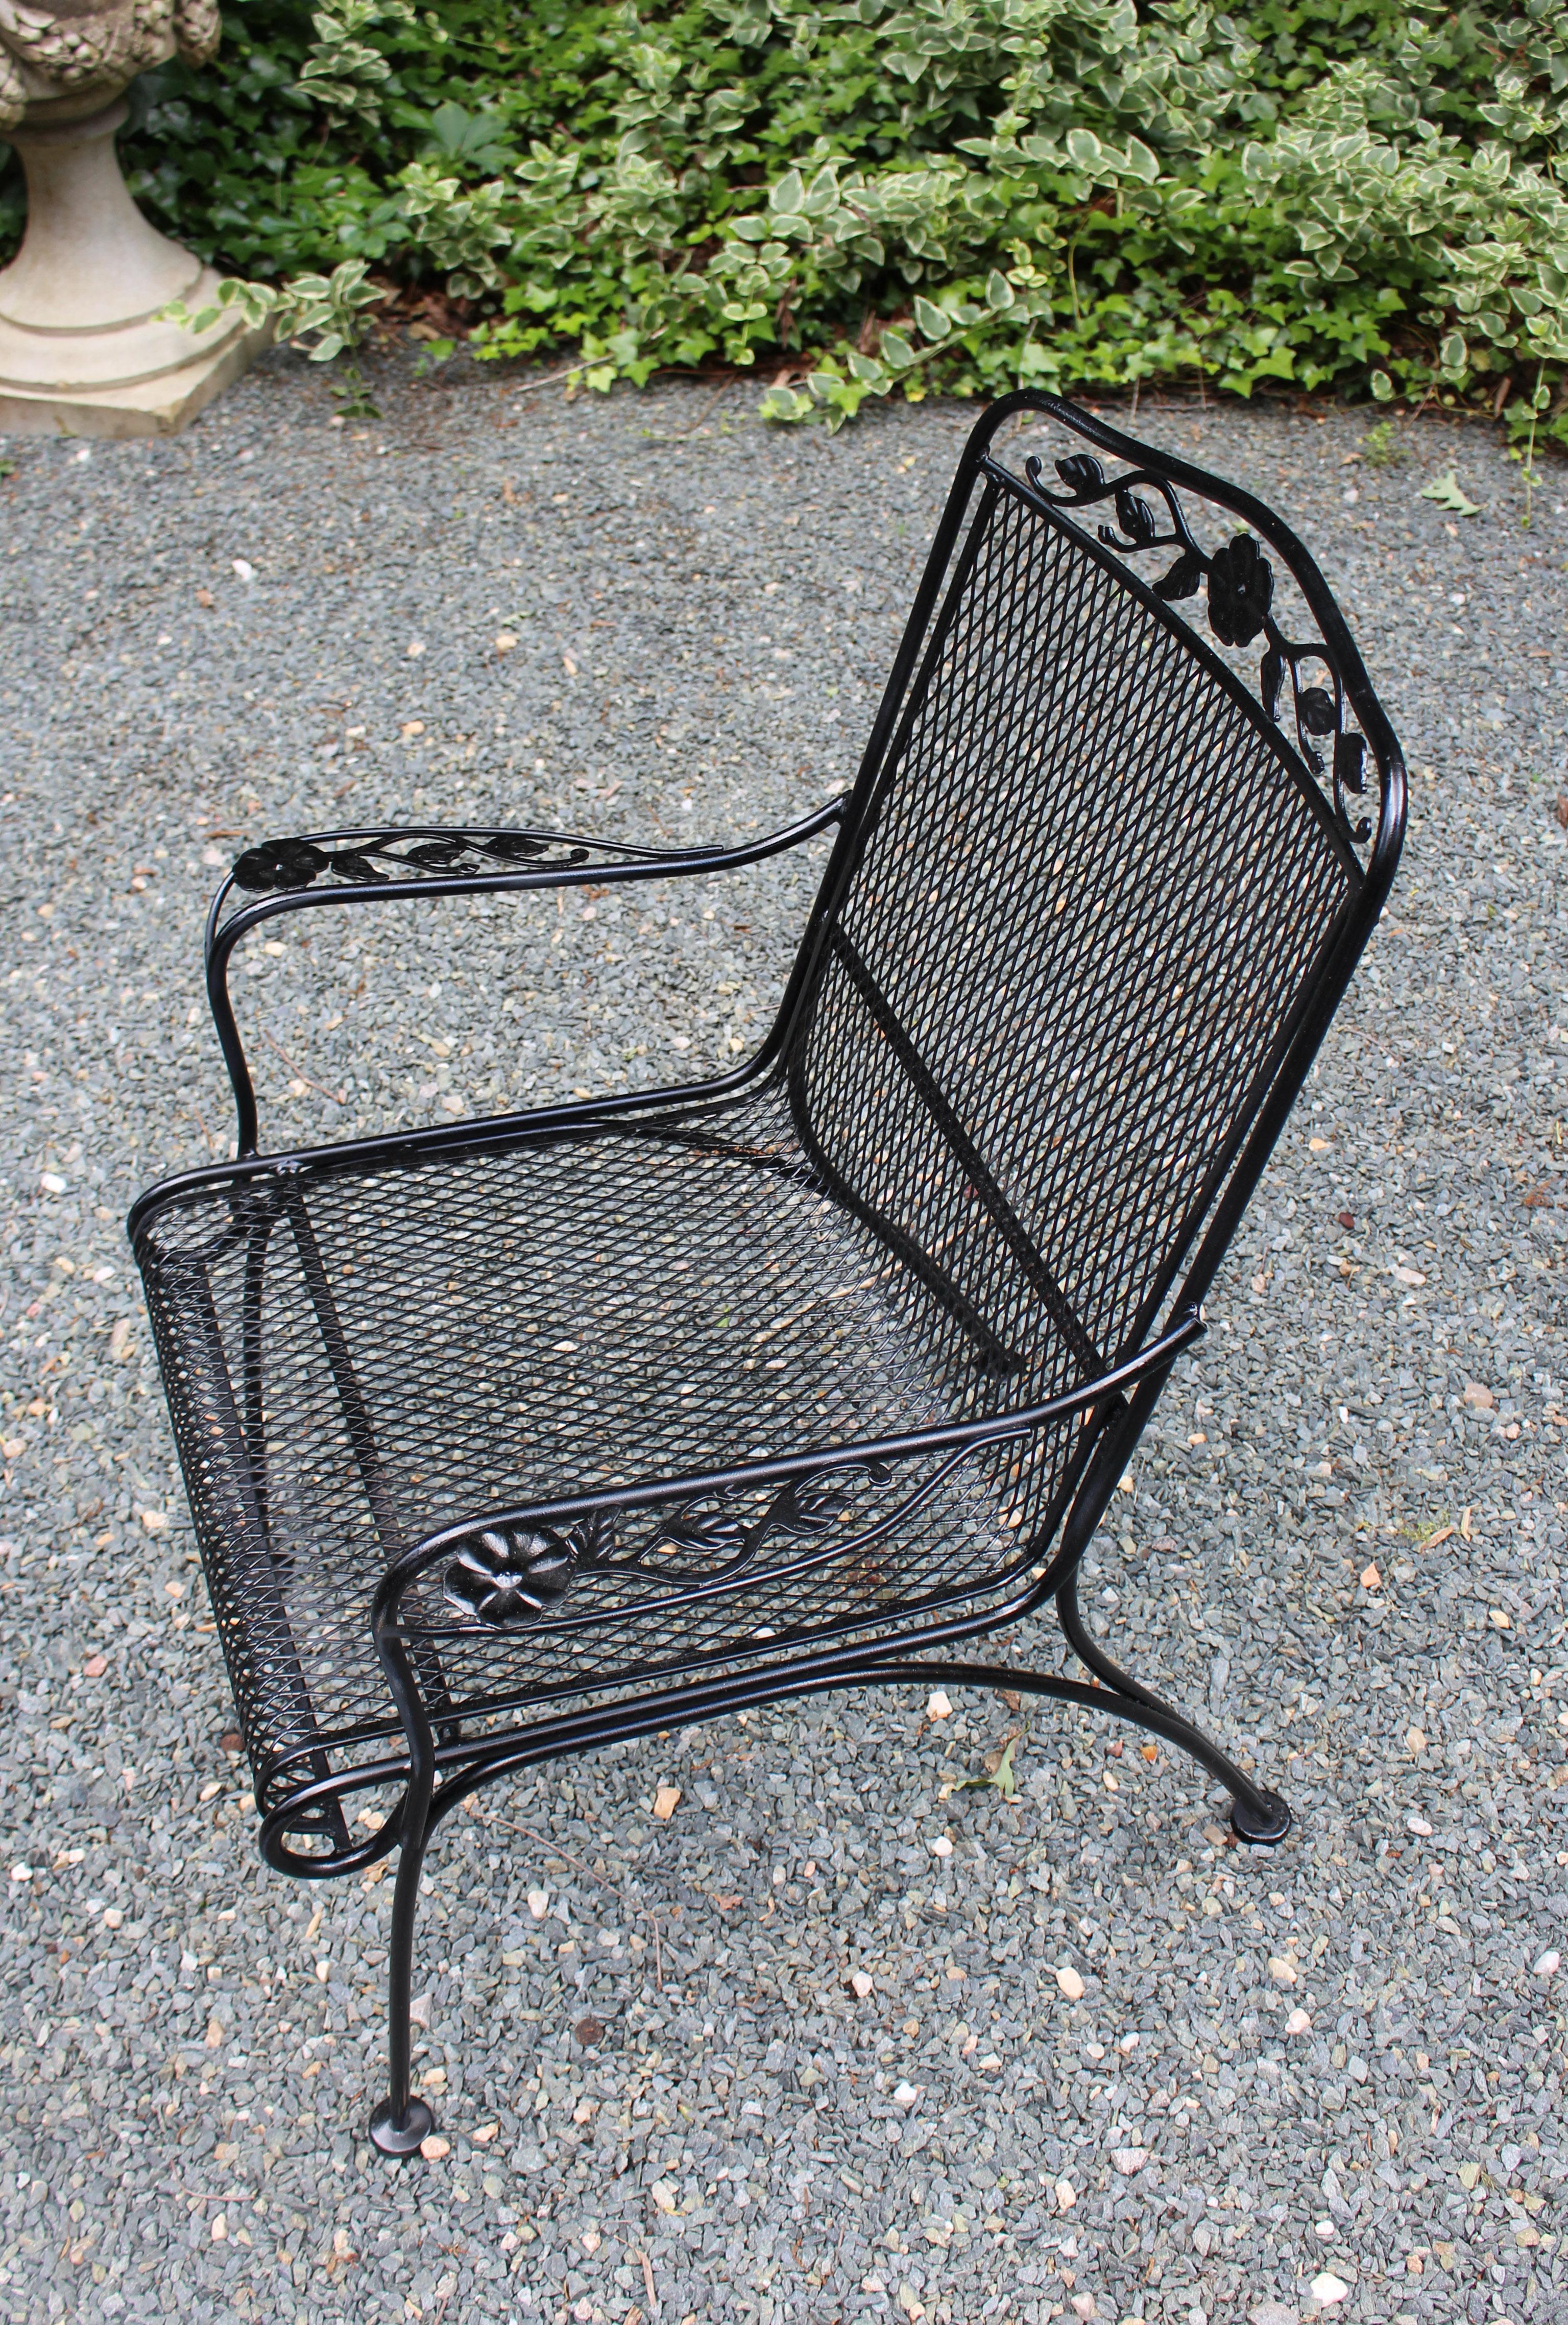 Mid-Century Modern Mid-20th Century Wrought Iron Arm Chair Attributed to Russell Woodard For Sale